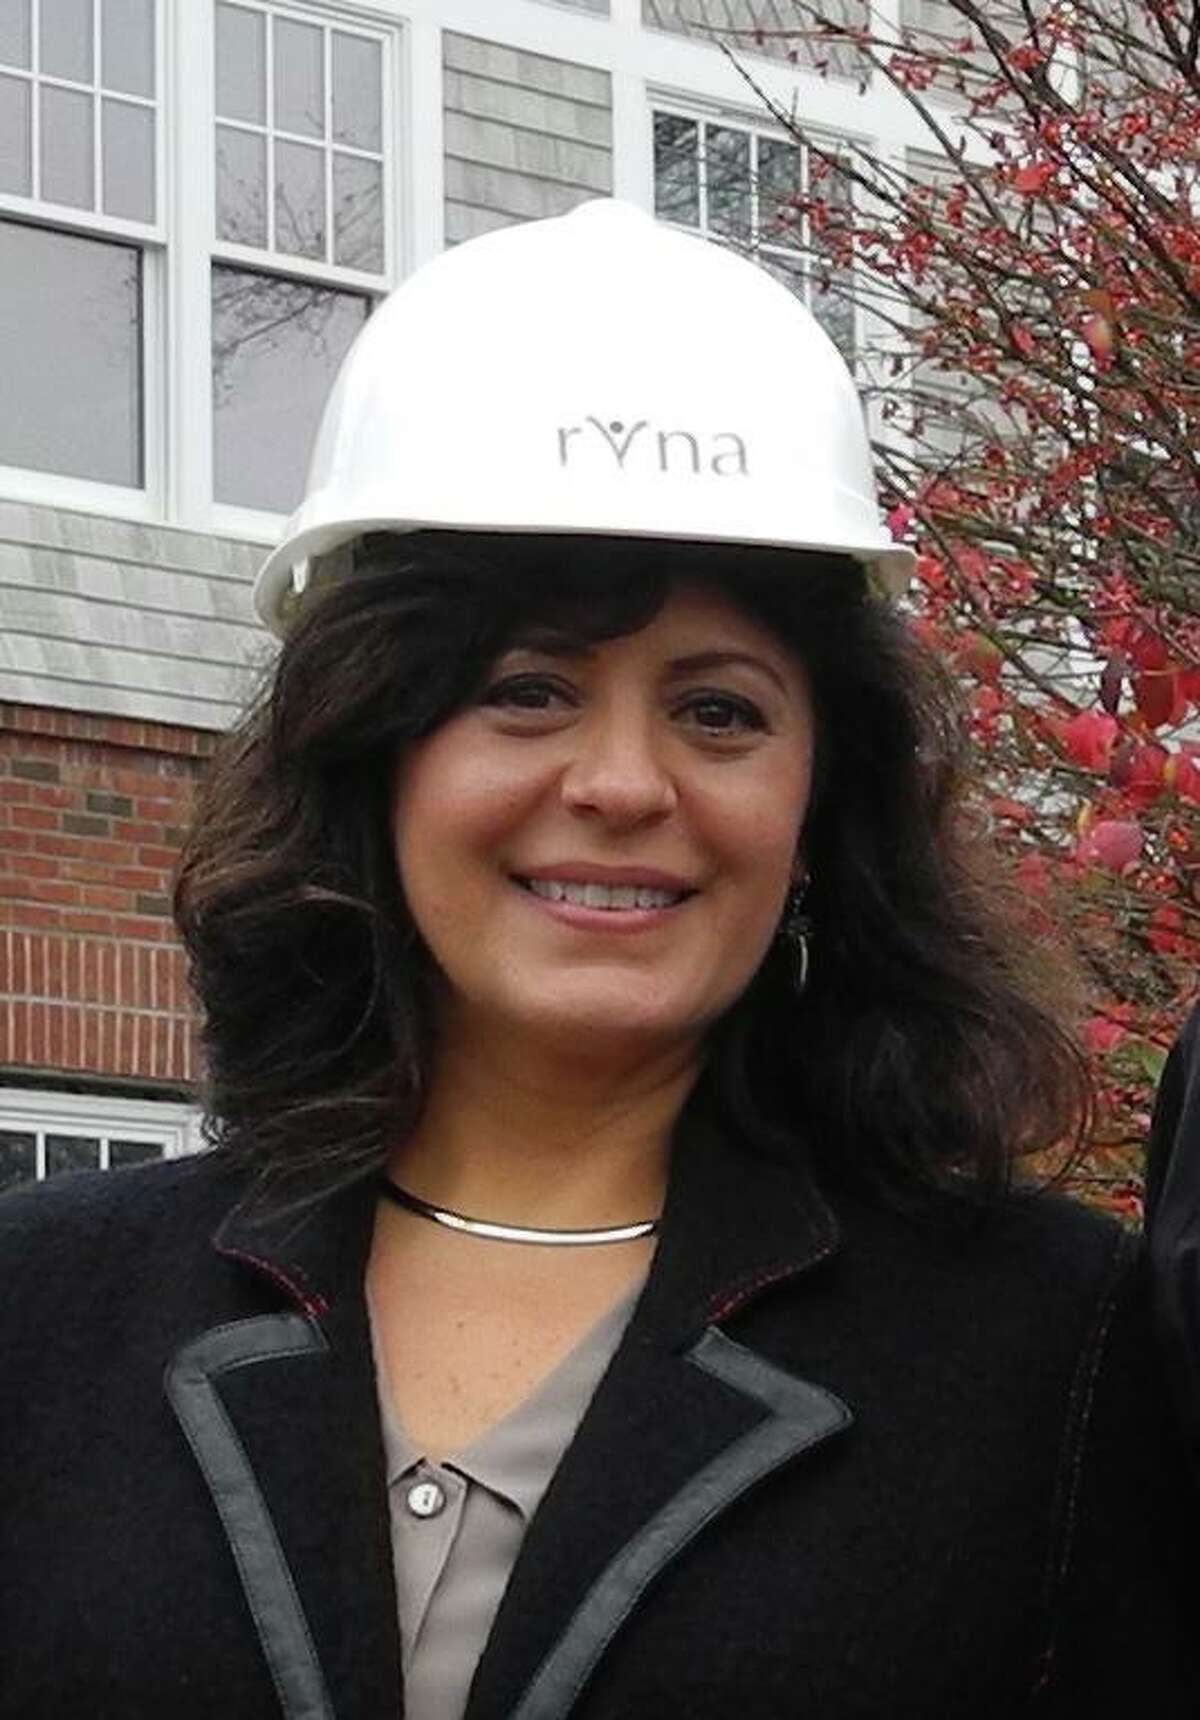 Theresa Santoro, shown here in a hard hat while showing off a building project in 2015, will continue to lead the enrlarged RVNAhealth after its merger with Beth and New Milford nursign agencies.